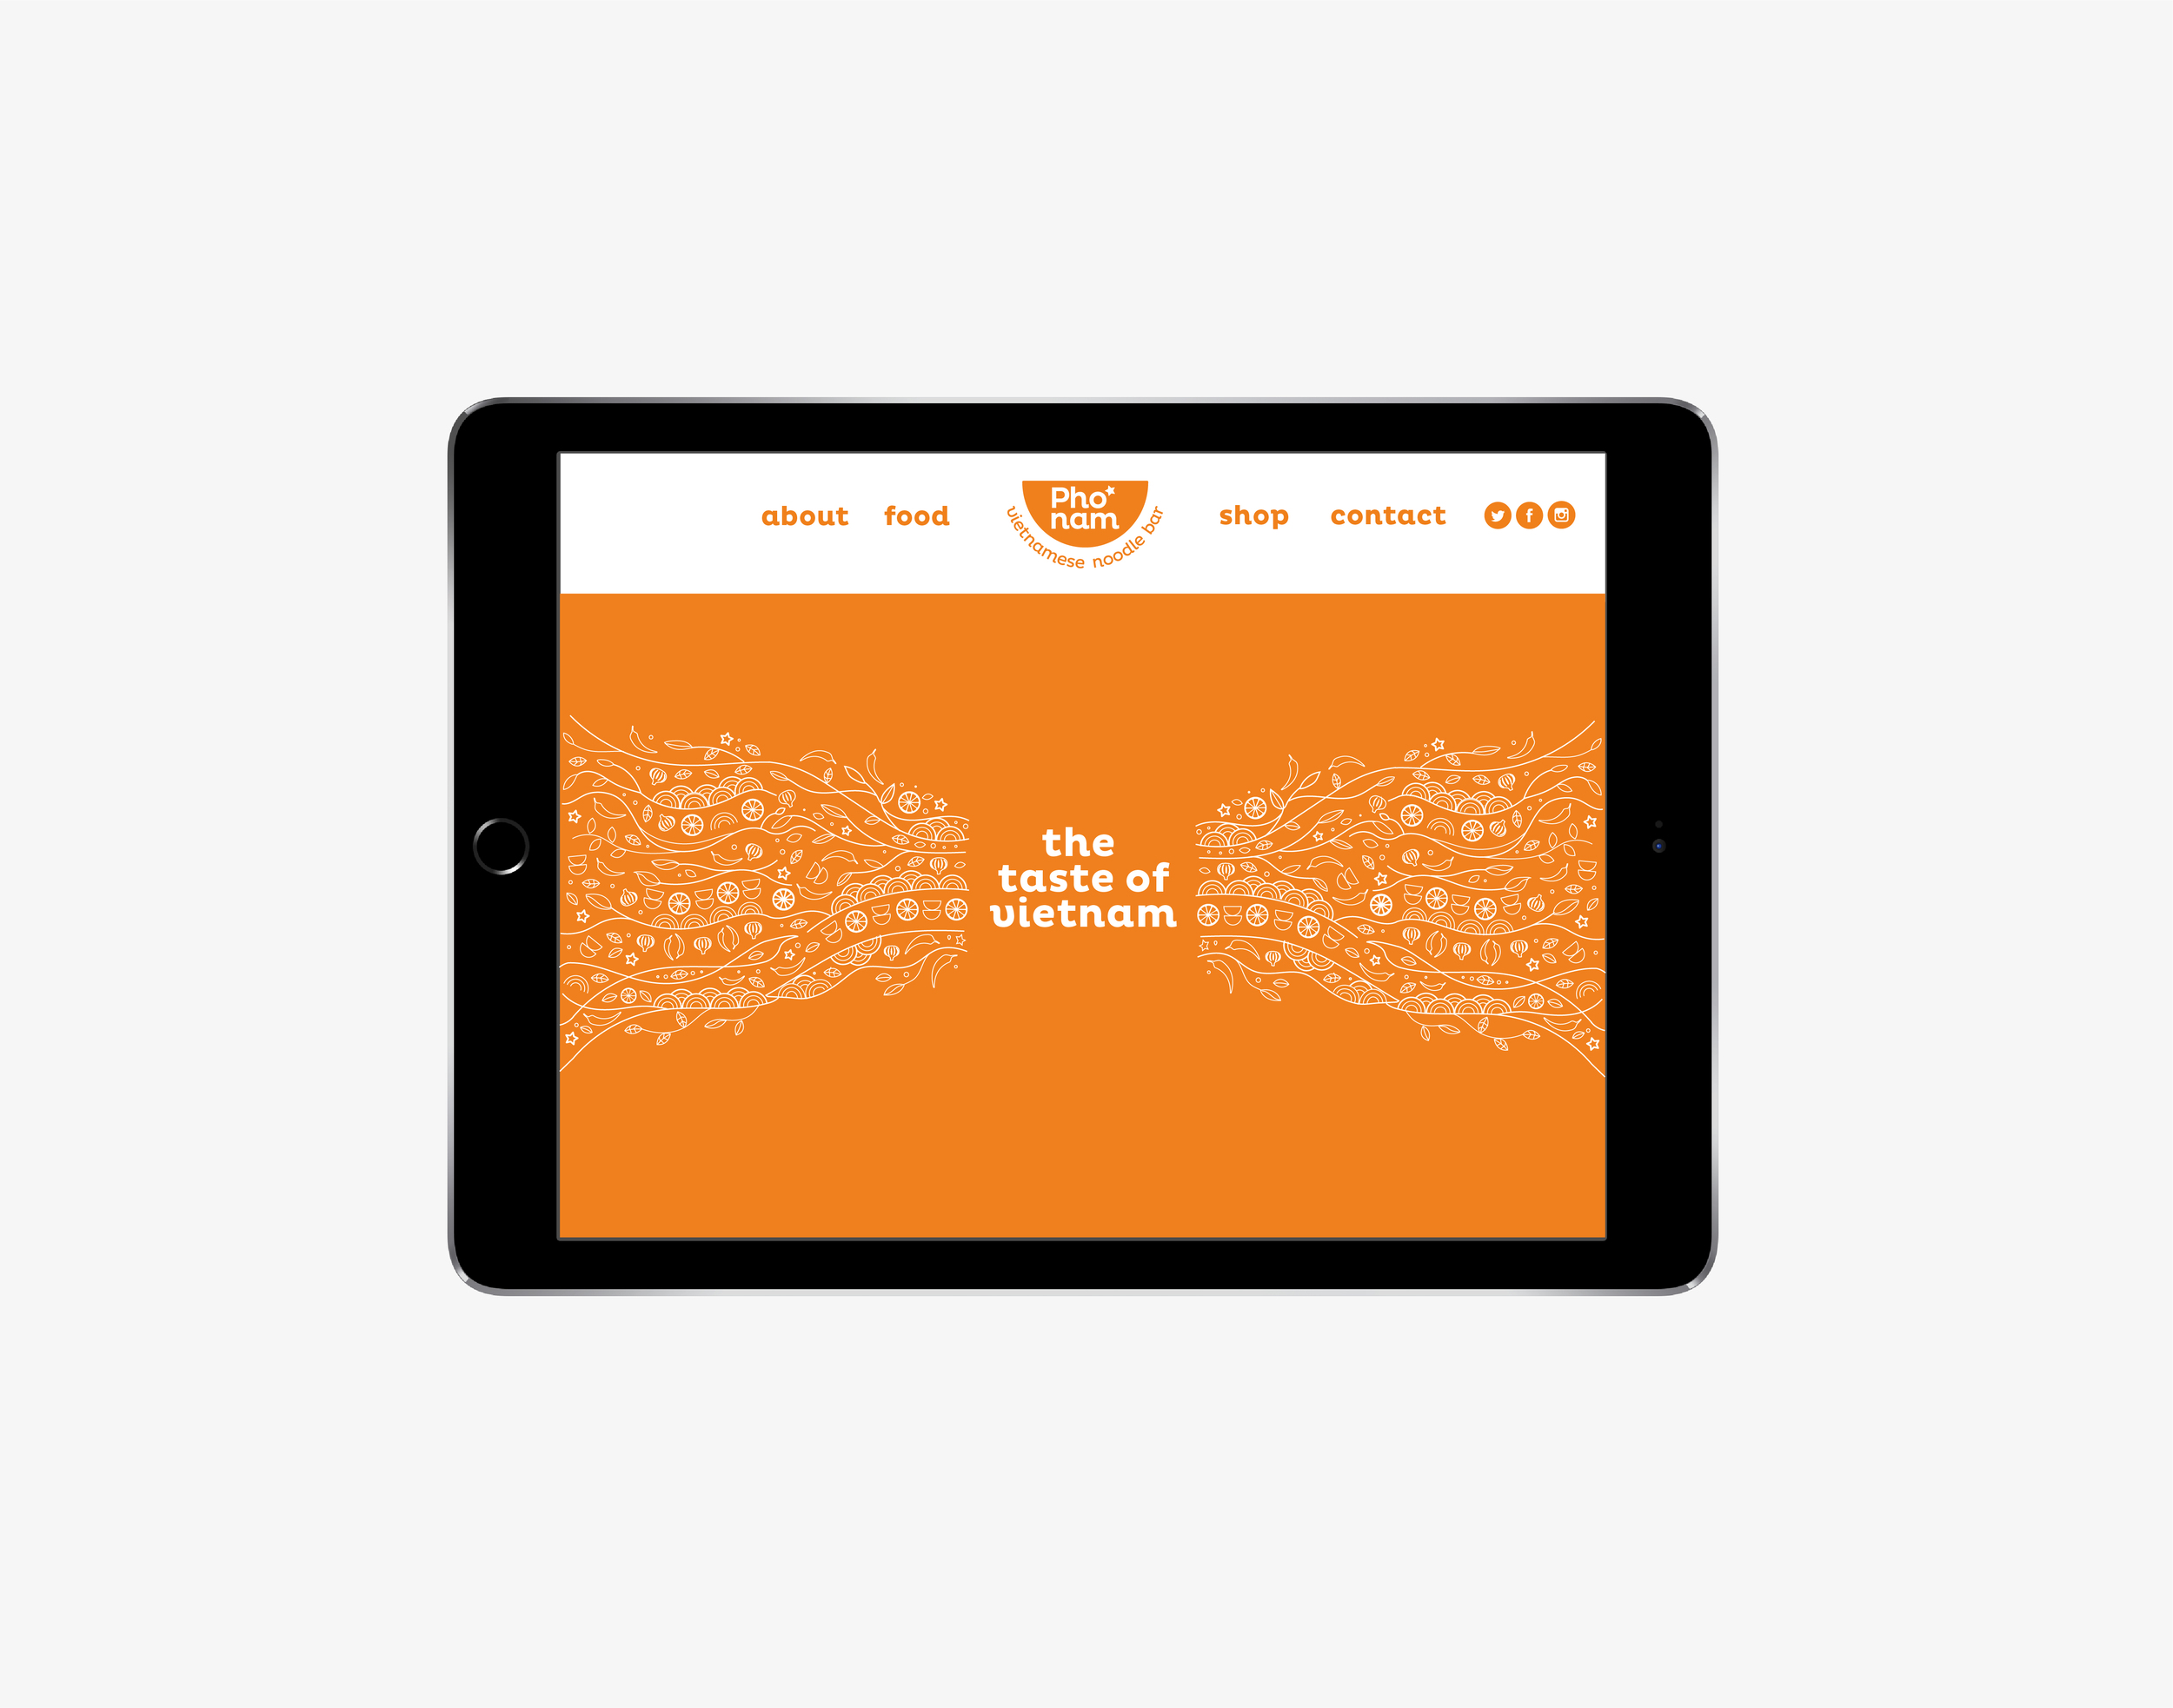 Graphic Design Company UK. An Apple iPad showing Pho Nam website homepage design